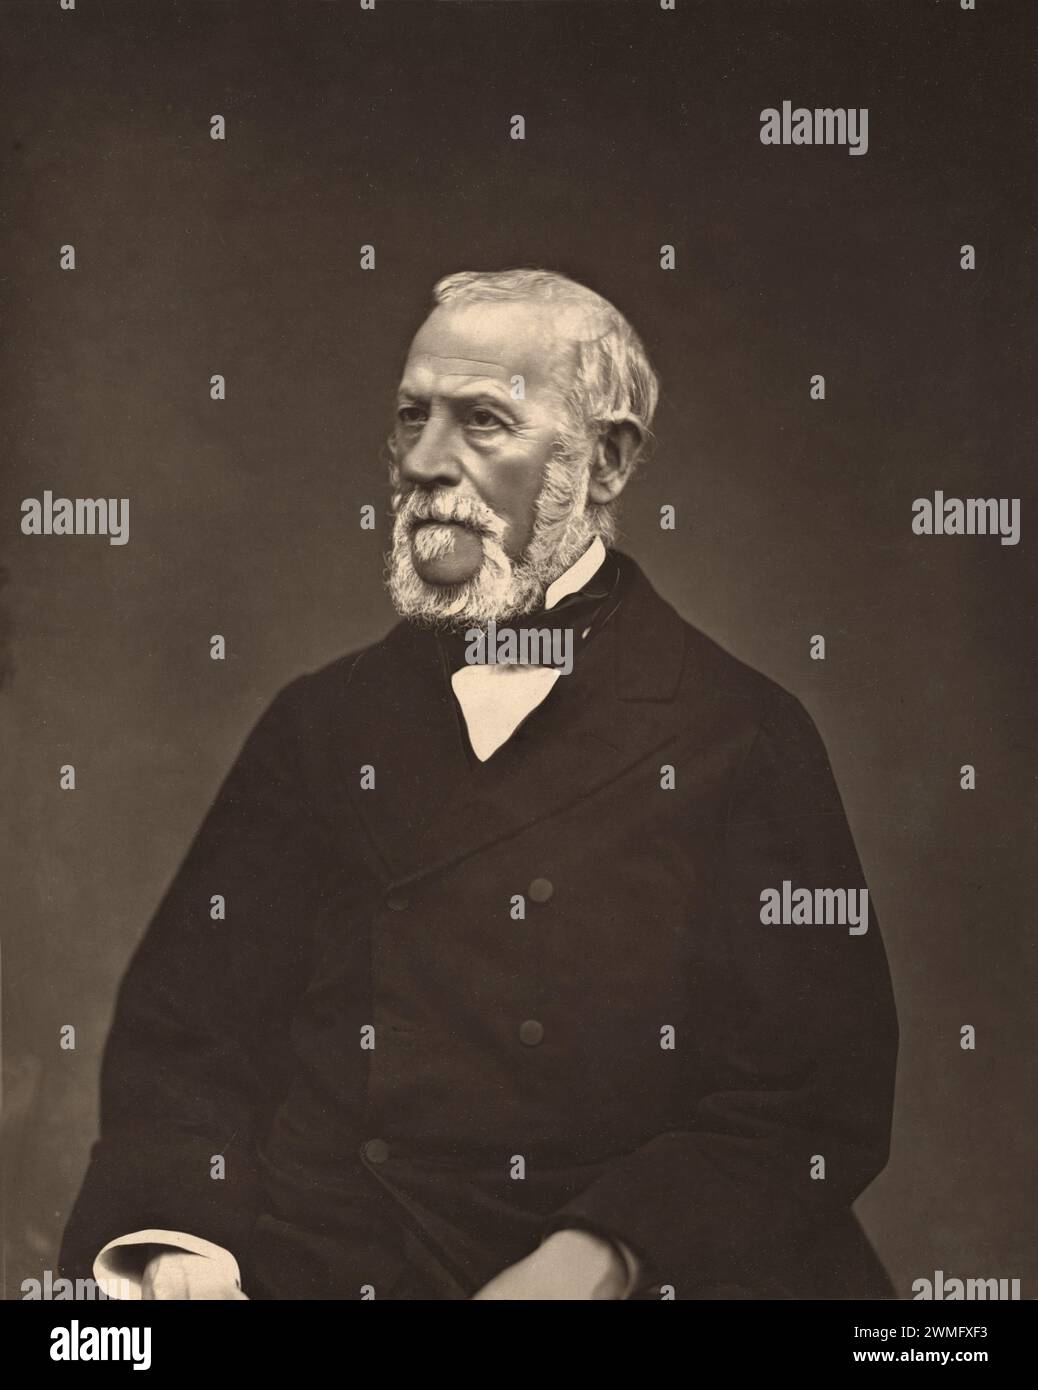 Portrait of Henri Martin (1810-1883) French Historian and Author of 'Histoire de France'. Vintage or Historic Carbon Print c1880 Stock Photo